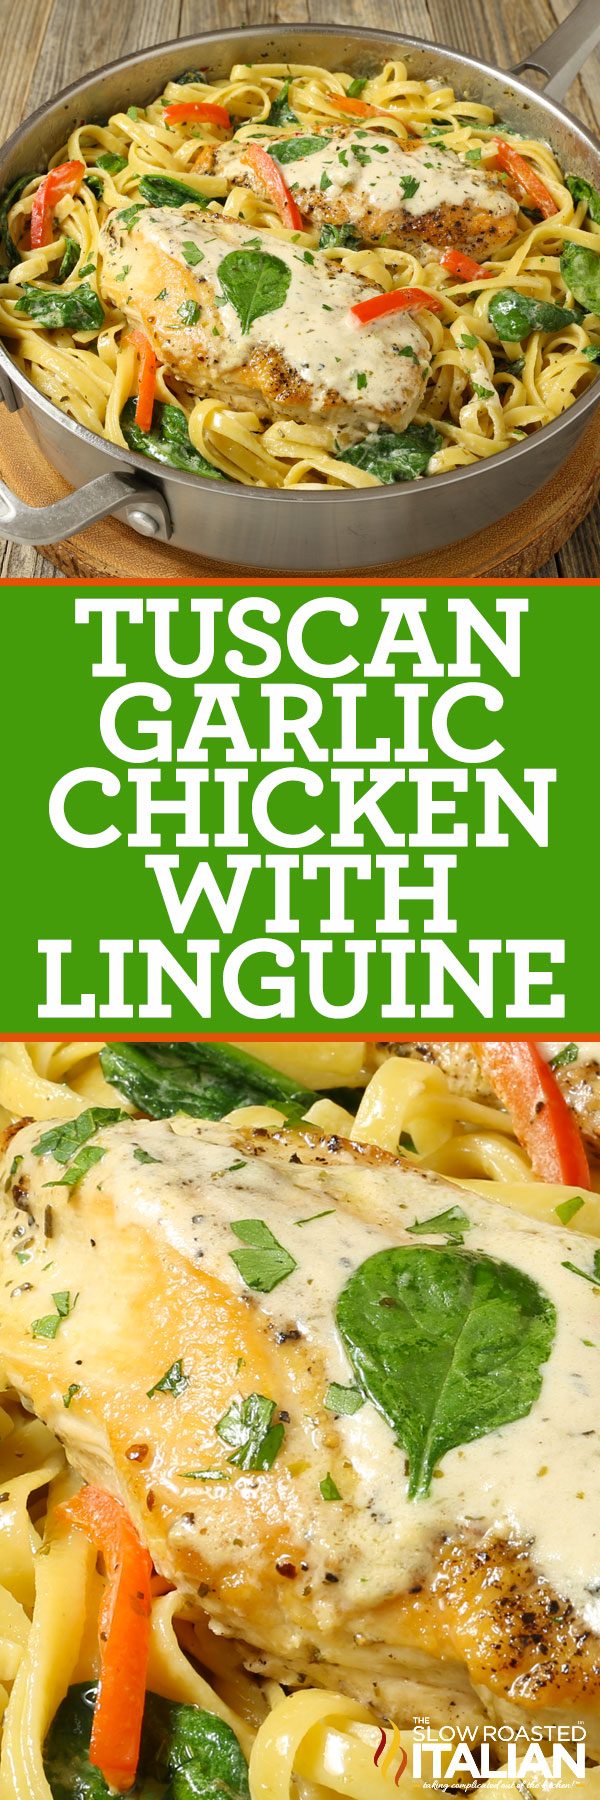 tuscan garlic chicken with linguine -pin